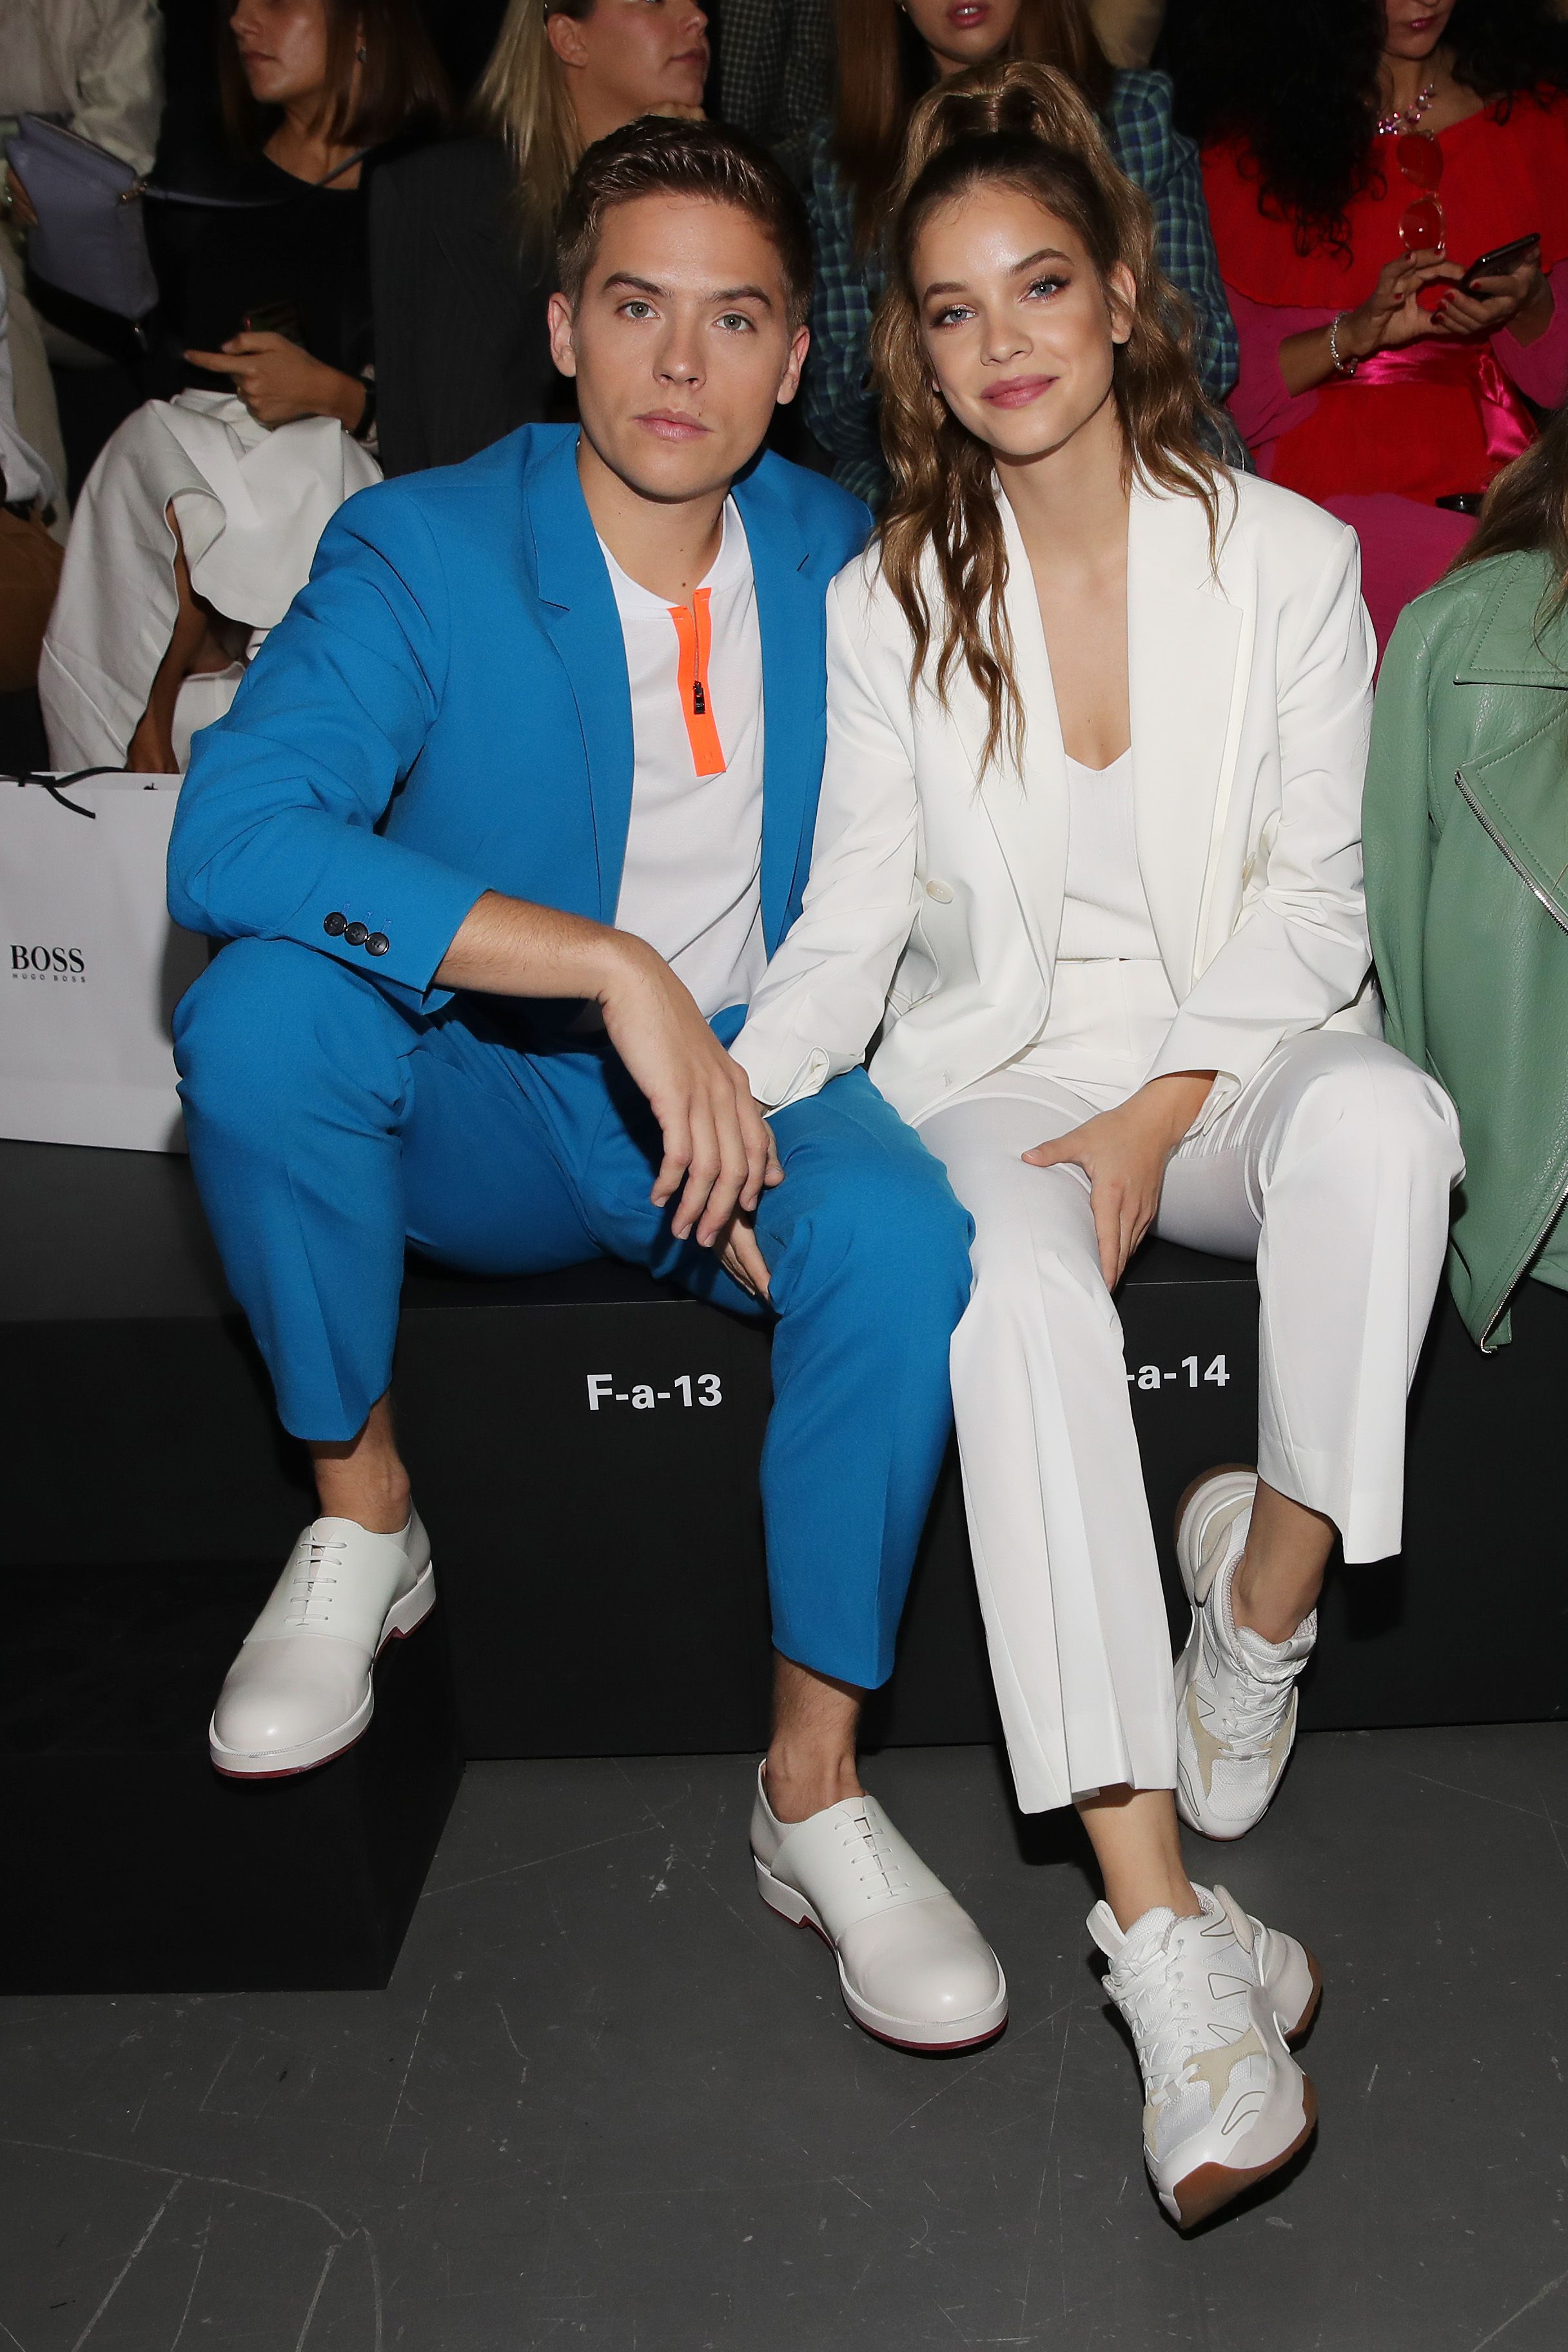 Milan Fashion Week: Which Celebrities Are On The Frow?